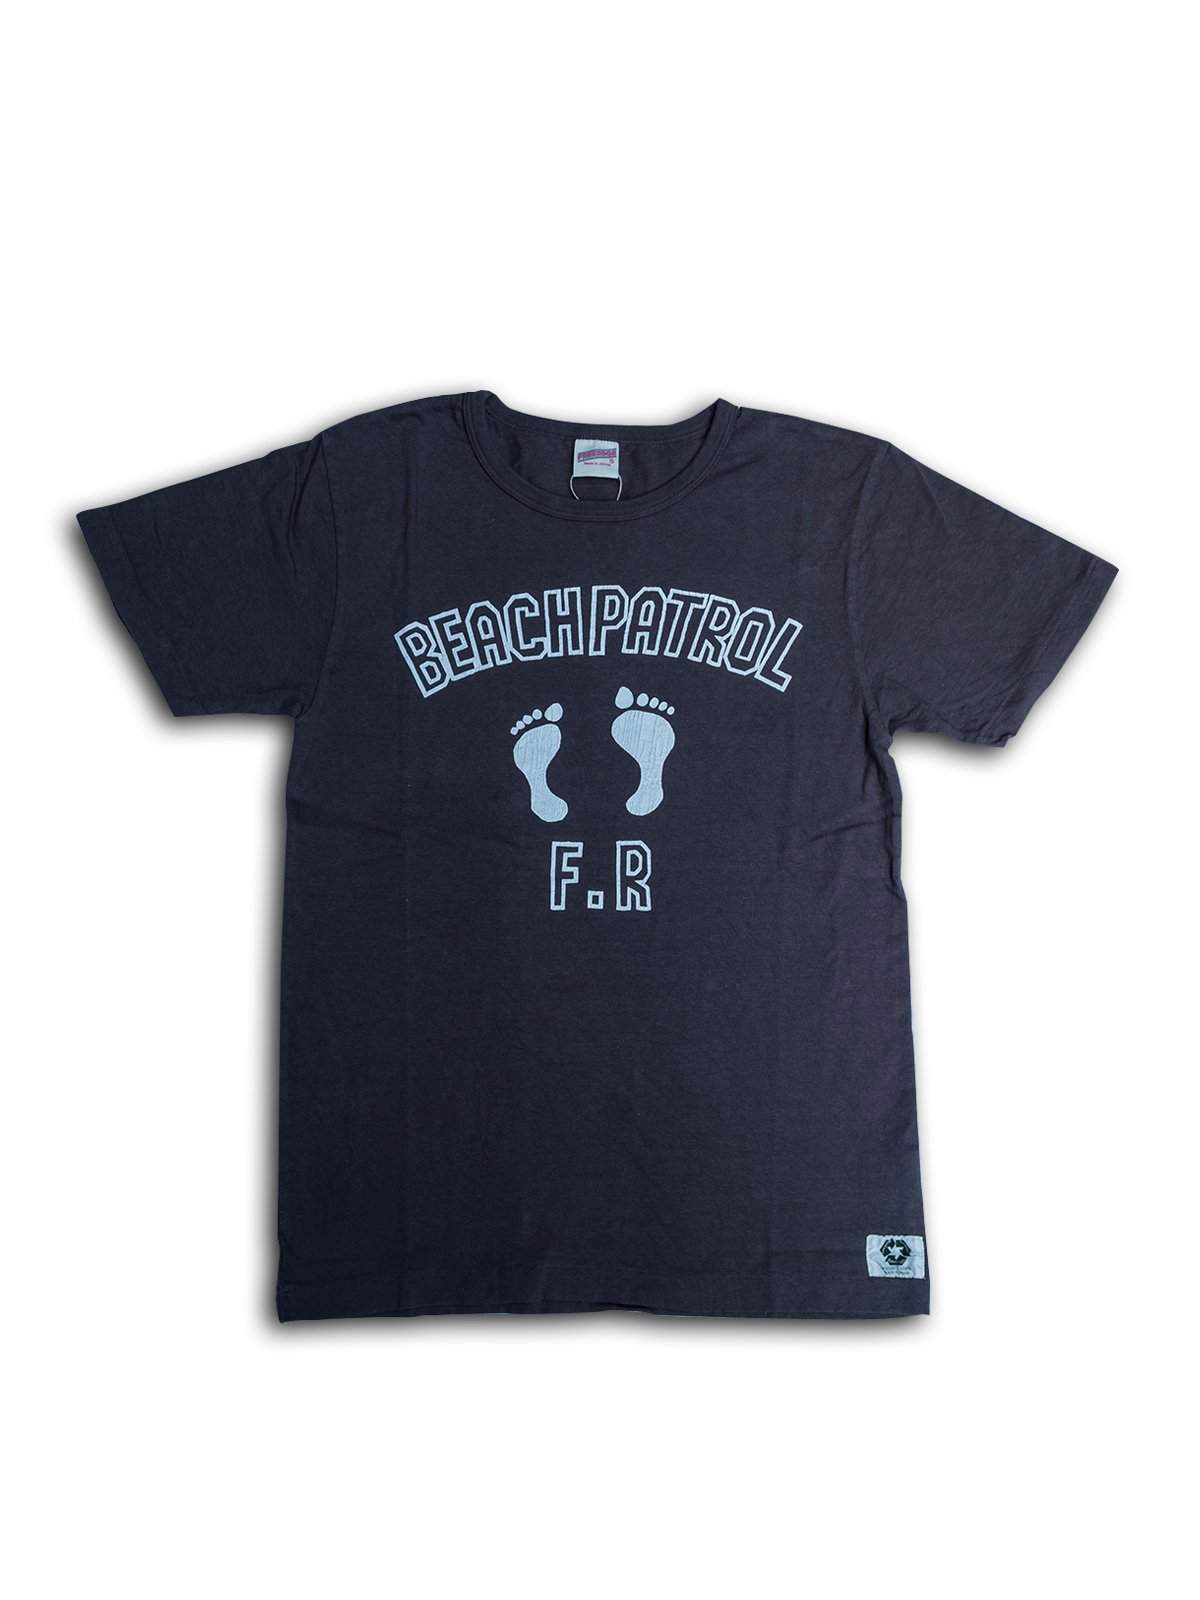 Free Rage Recycled Cotton Tee Beach Patrol Grey - MORE by Morello Indonesia